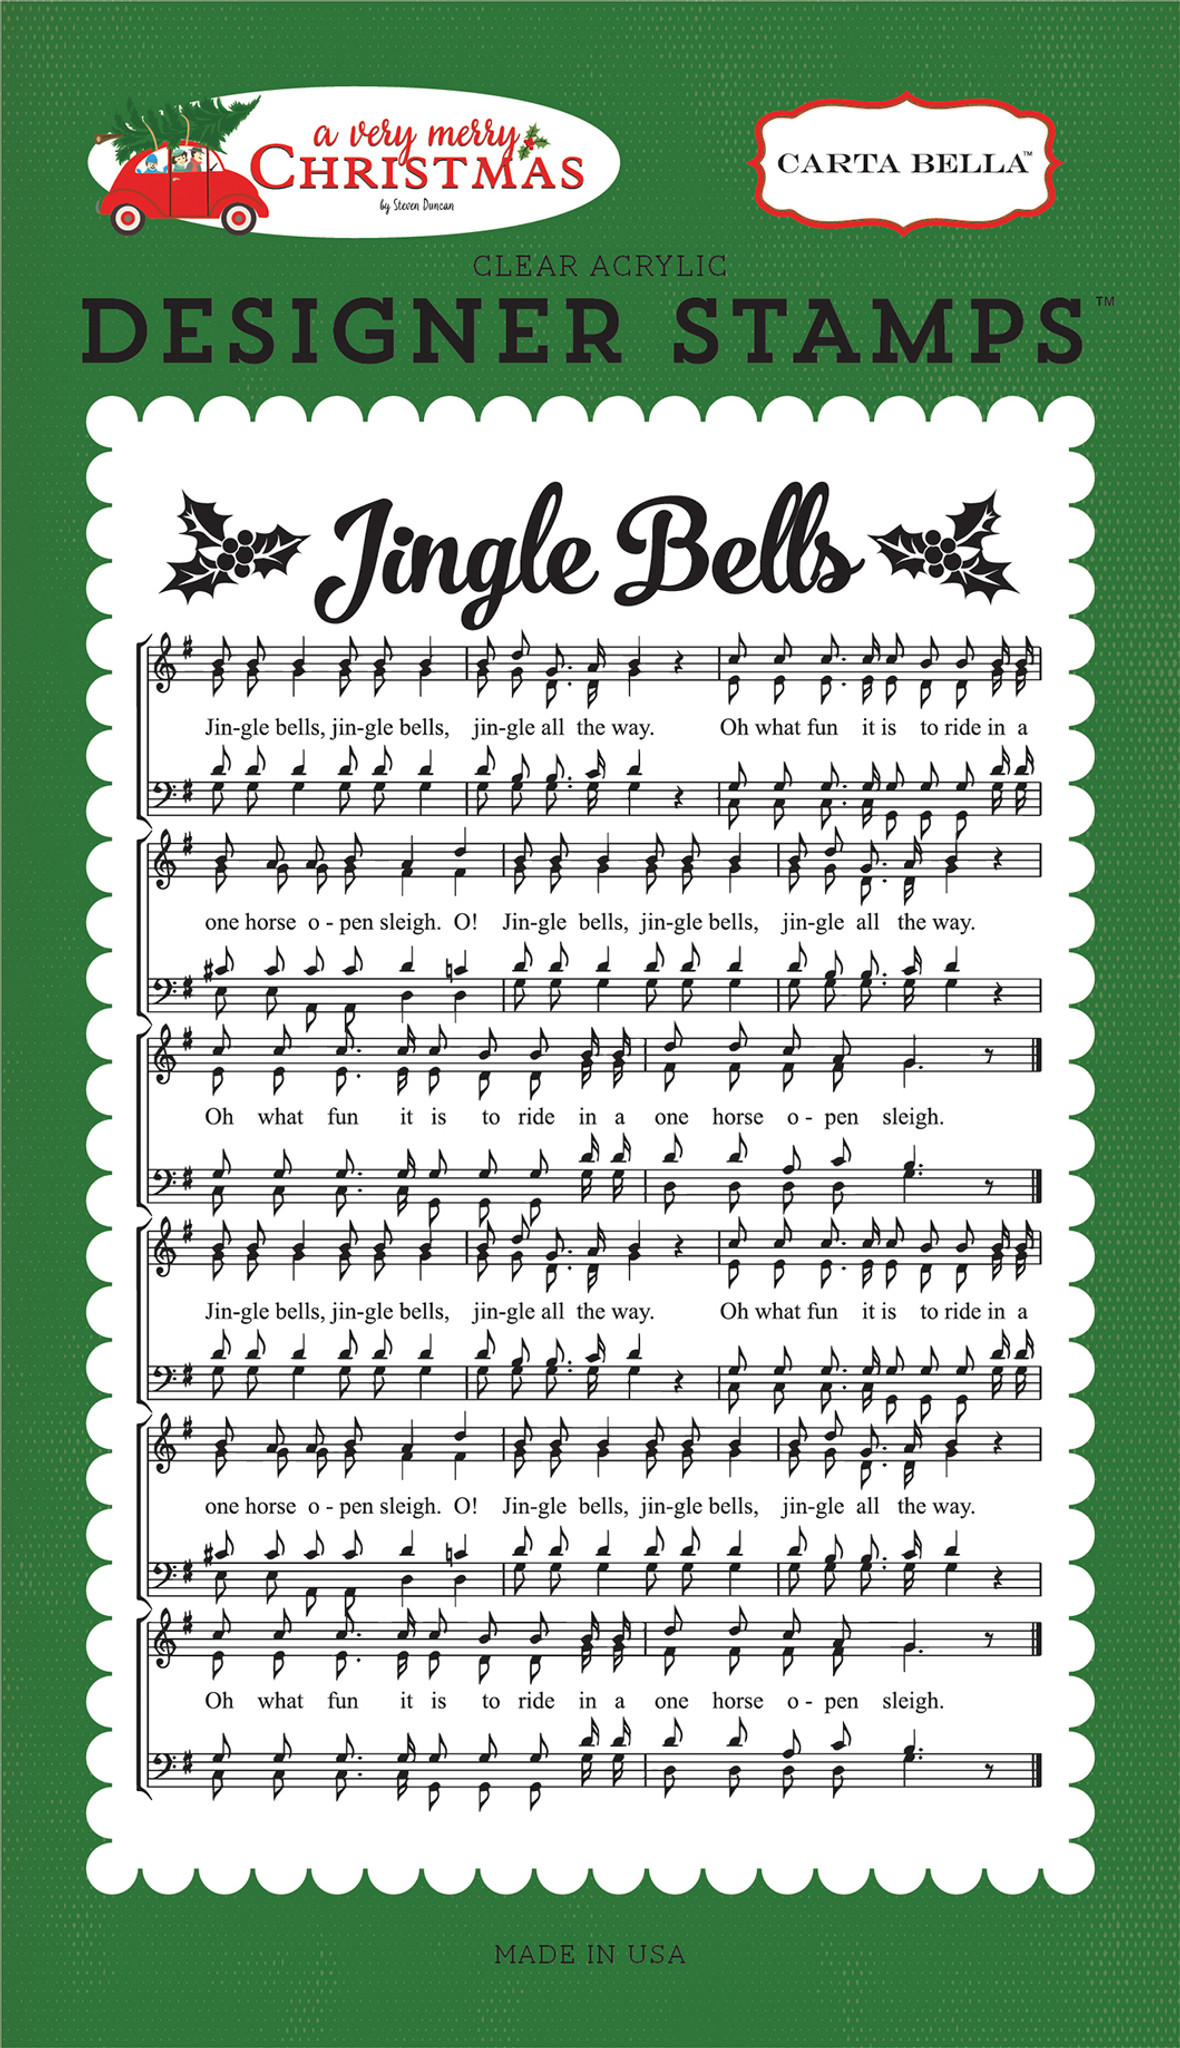 Jingle Bells Text Photos and Images